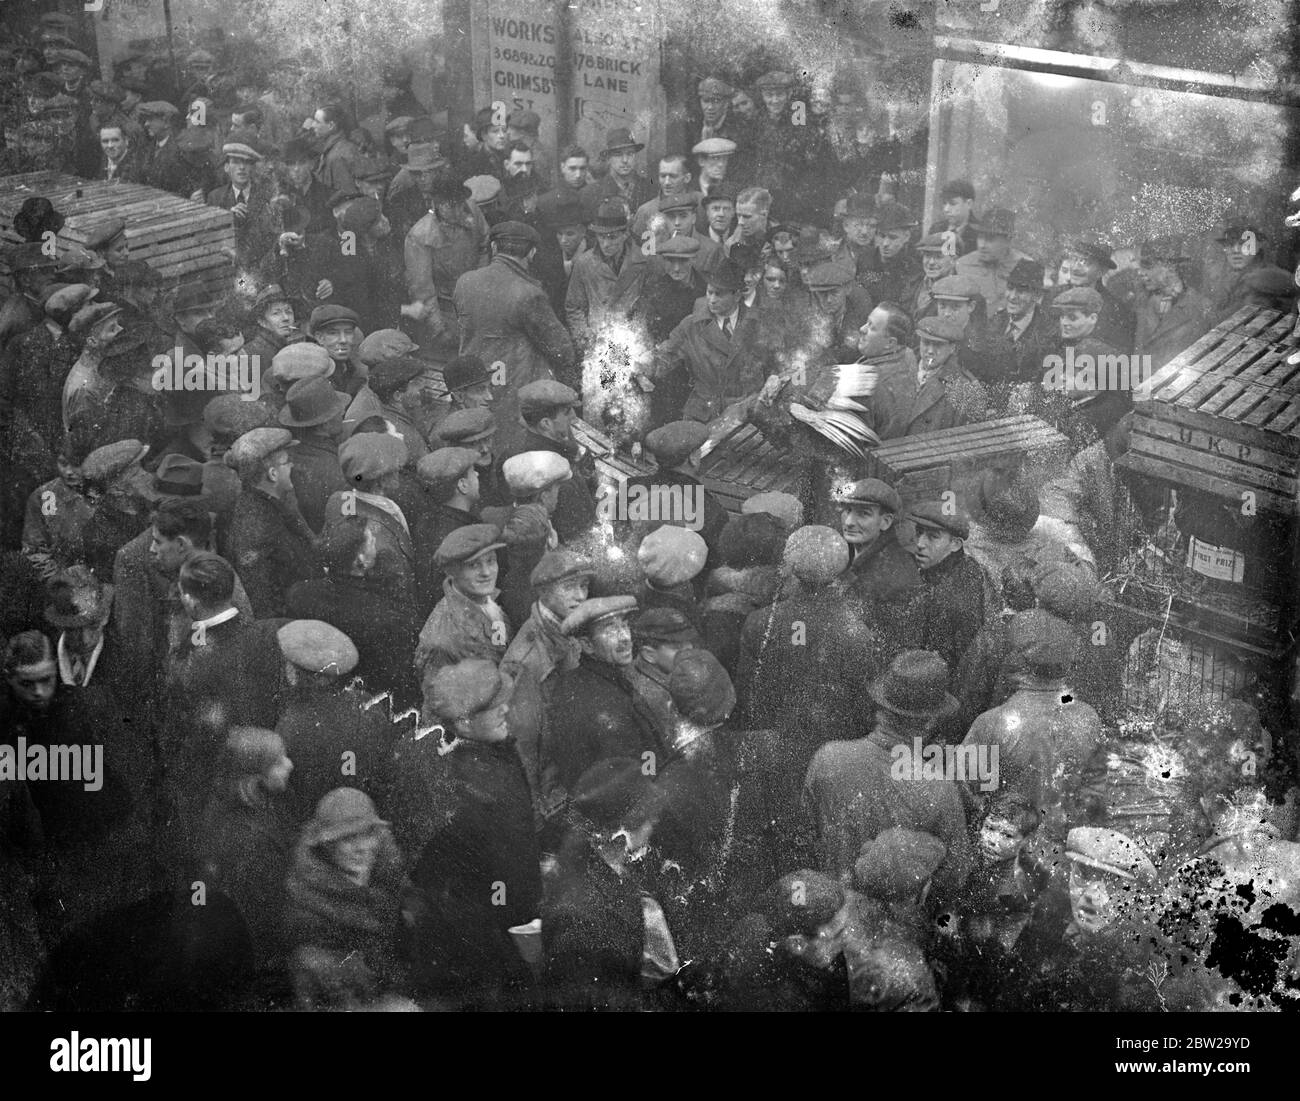 Buying the Christmas dinner on the wing. Despite snow and sleet large crowds gathered round the poultry dealers in the open air market in Schlater Street, Bethnal Green, Bethnal in search of their Christmas turkey today (Sunday). Photo shows, the cloth capped crowd round a Turkey still in Schlater Street today (Sunday). 19 December 1937 Stock Photo